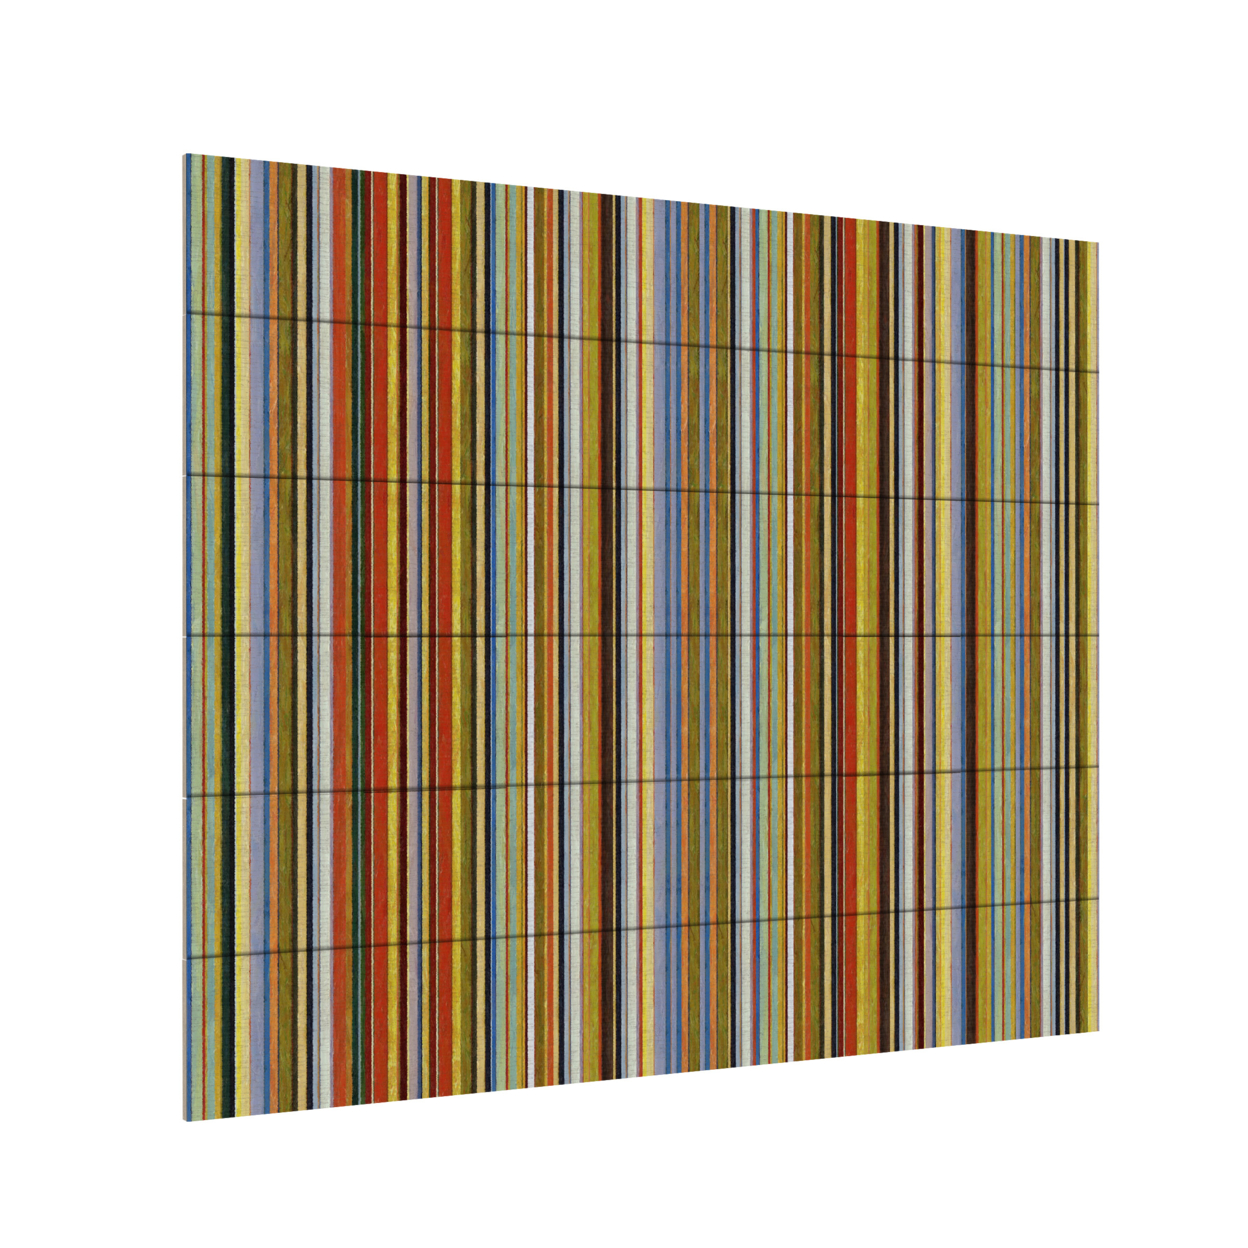 Wooden Slat Art 18 X 22 Inches Titled Comfortable Stripes VII Ready To Hang Home Decor Picture